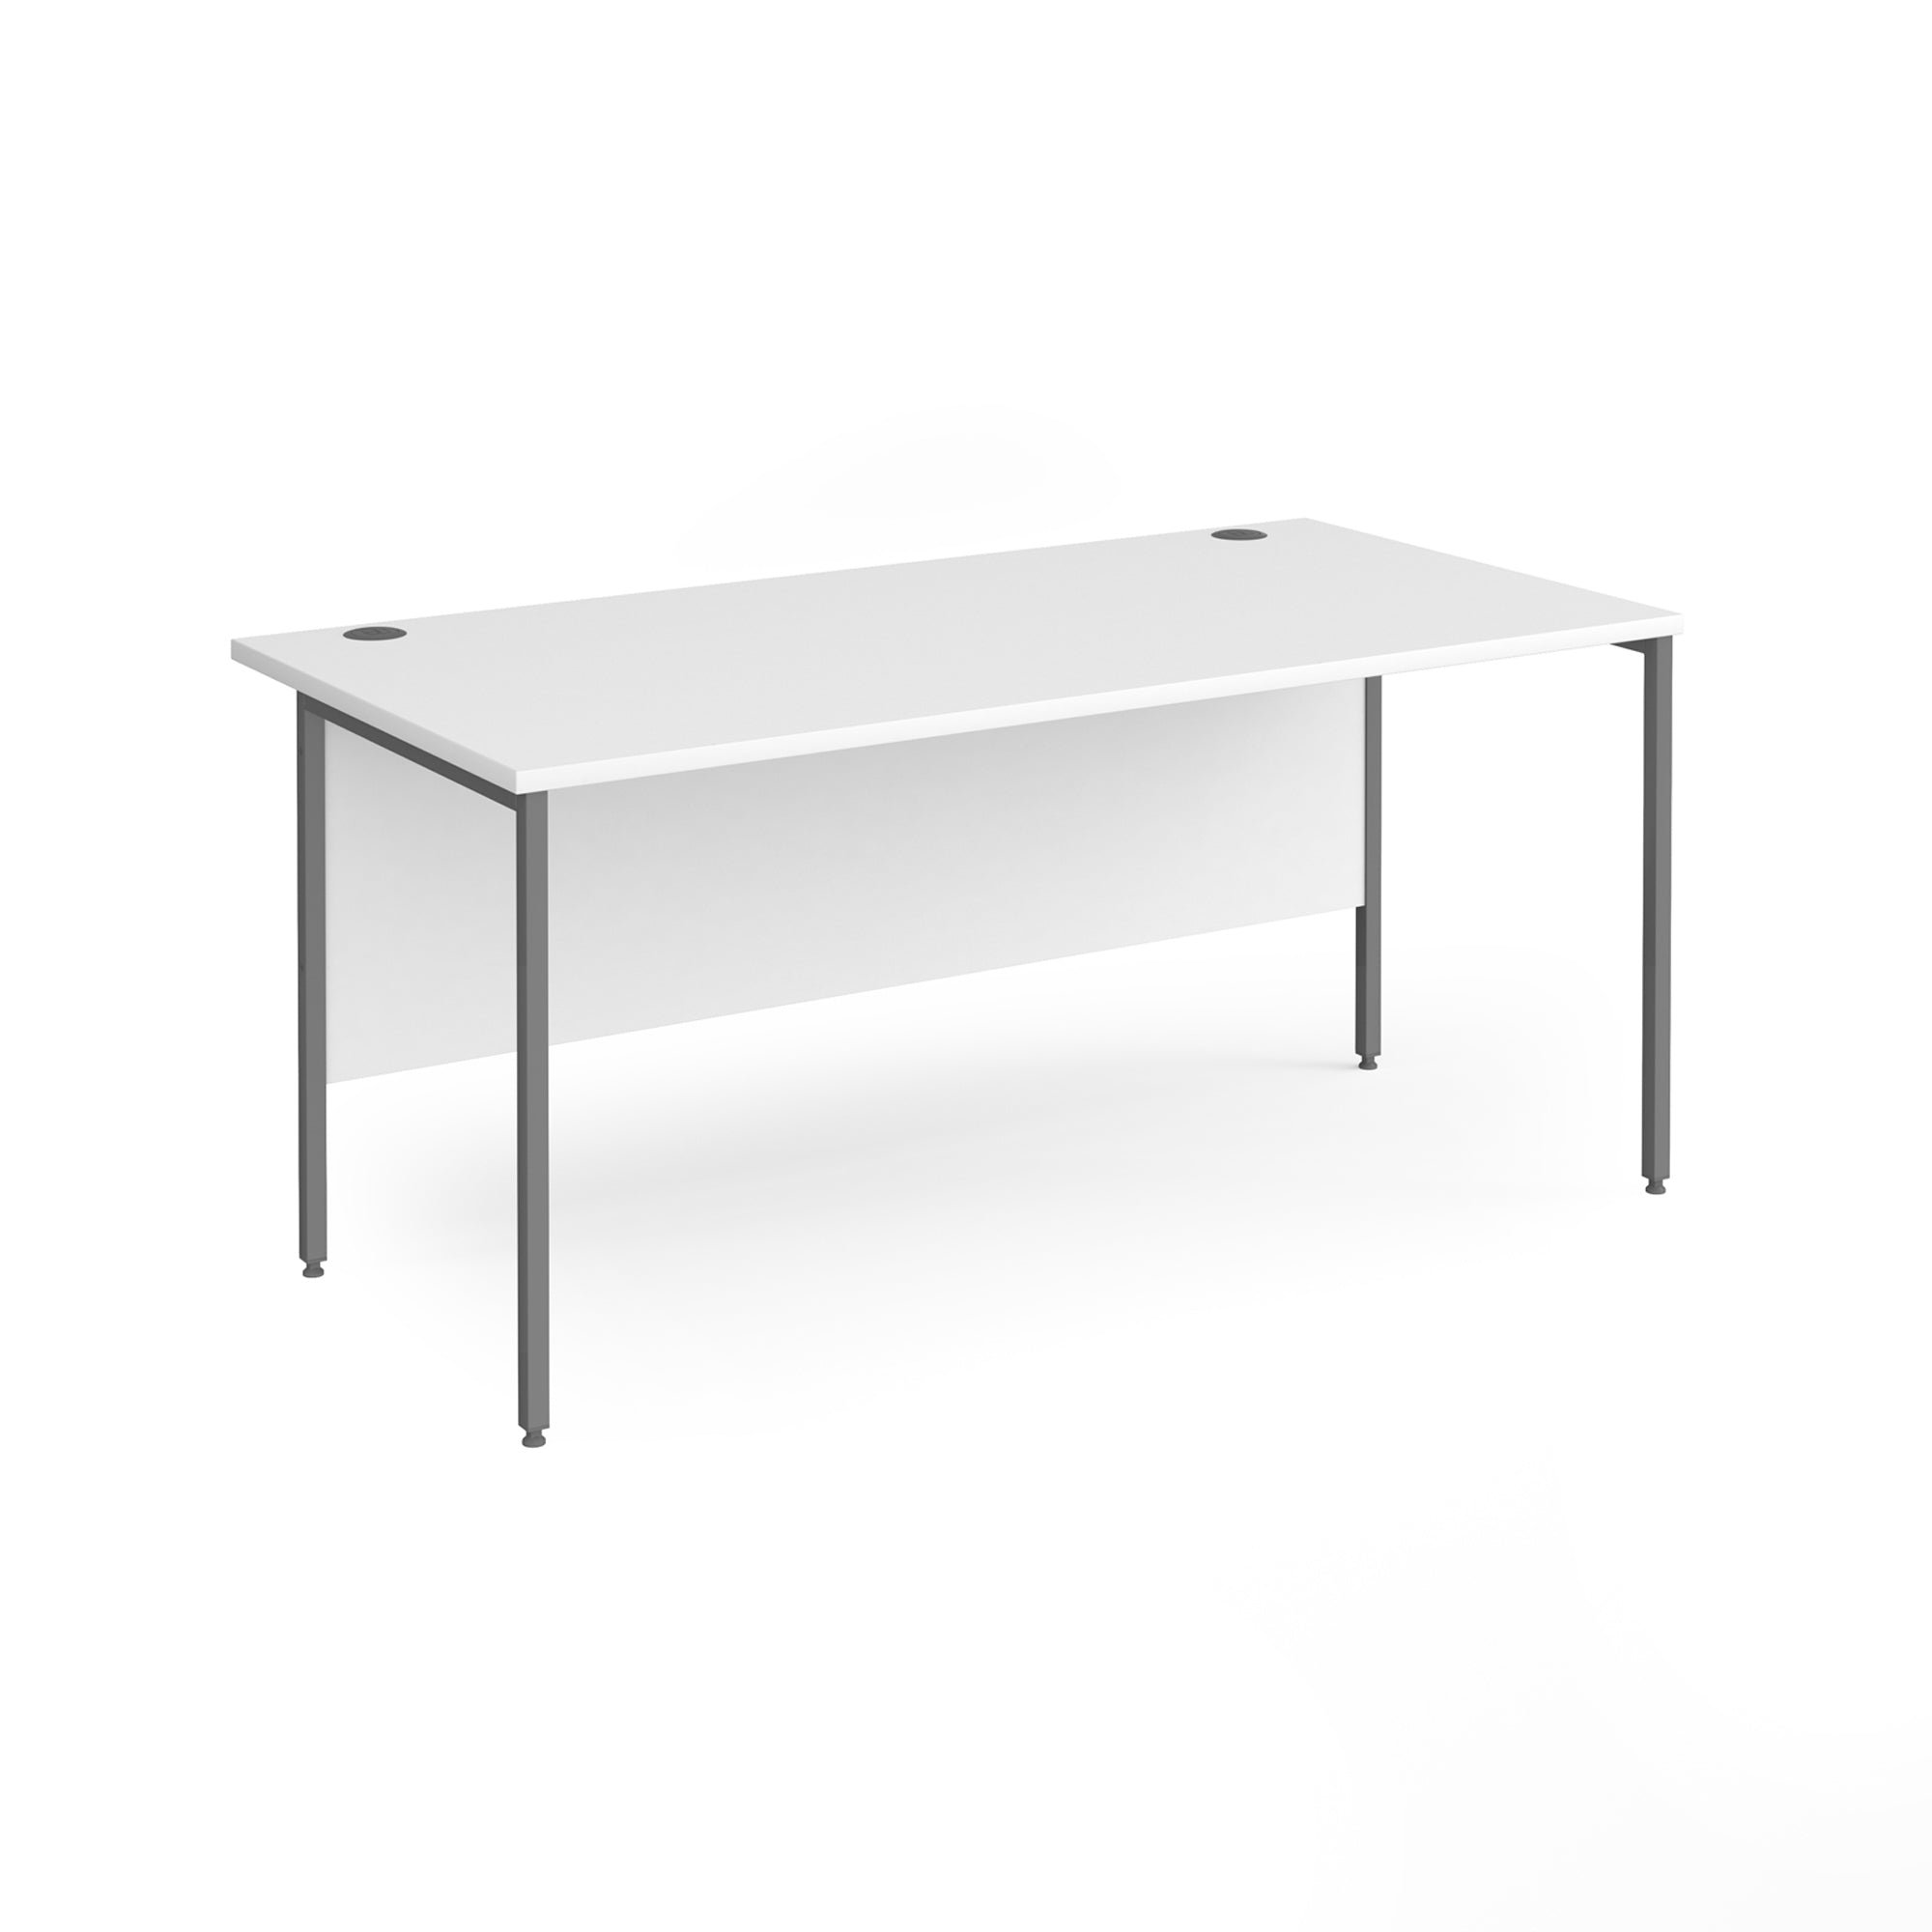 Contract 25 straight desk with H-Frame leg - Office Products Online